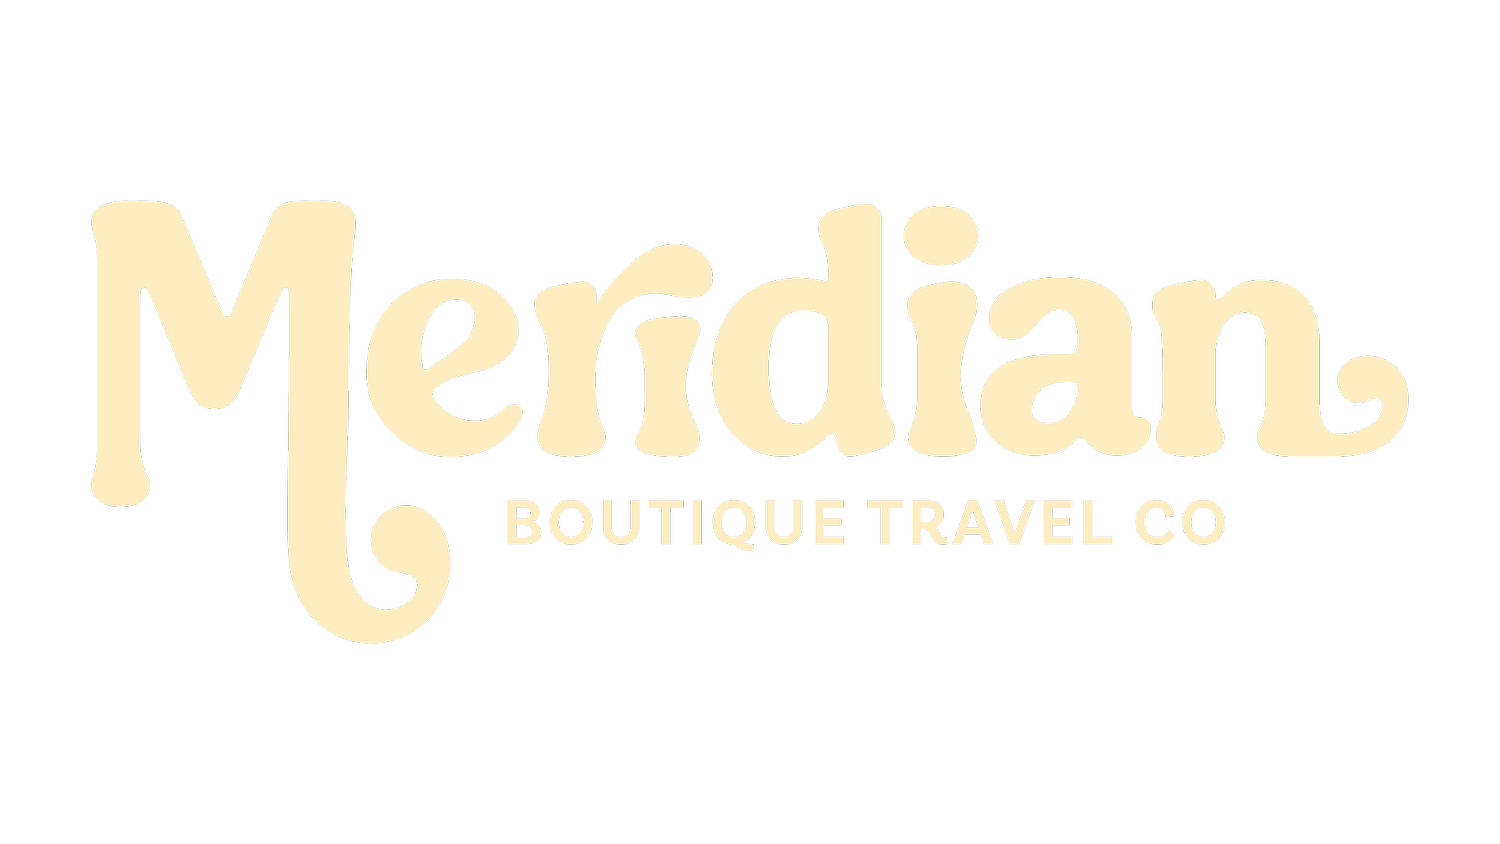 Meridian Boutique Travel Company | Group Travel for Women